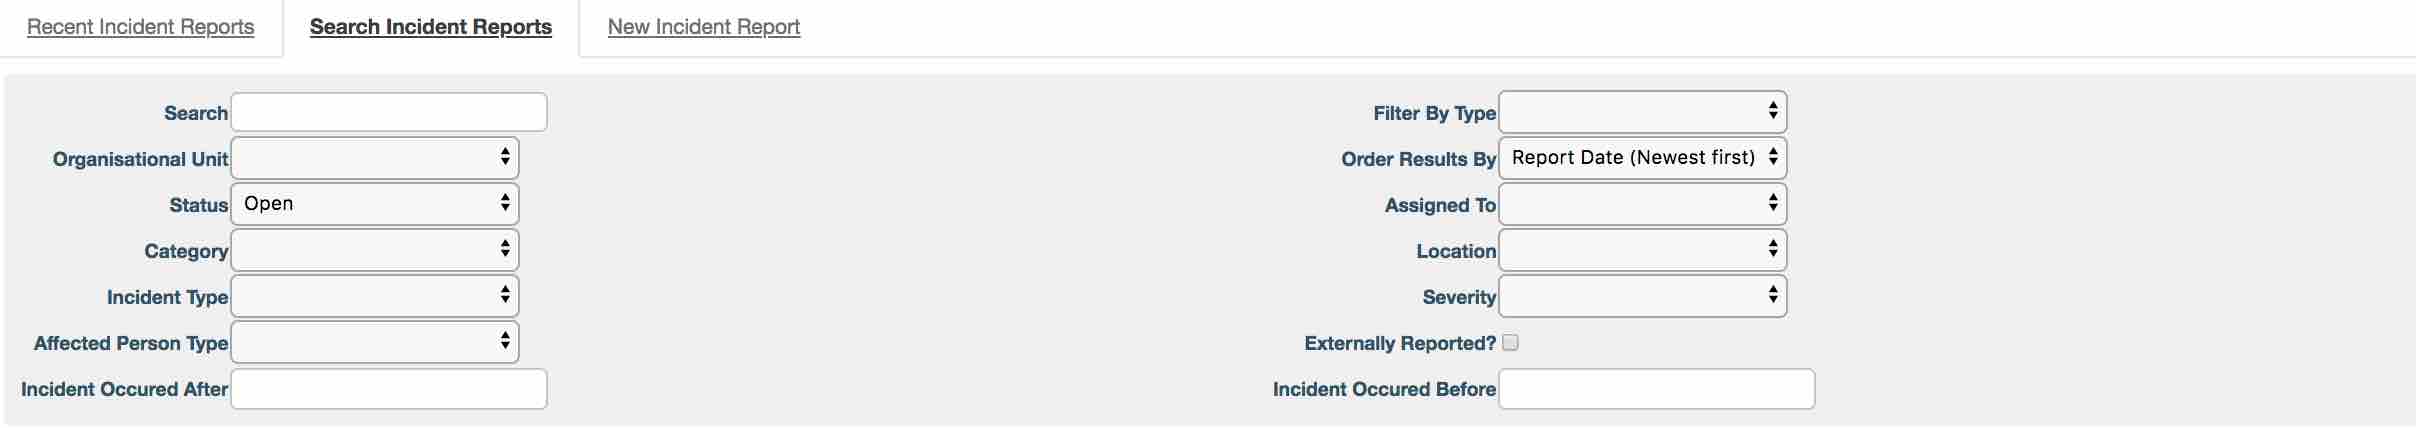 Incident search options